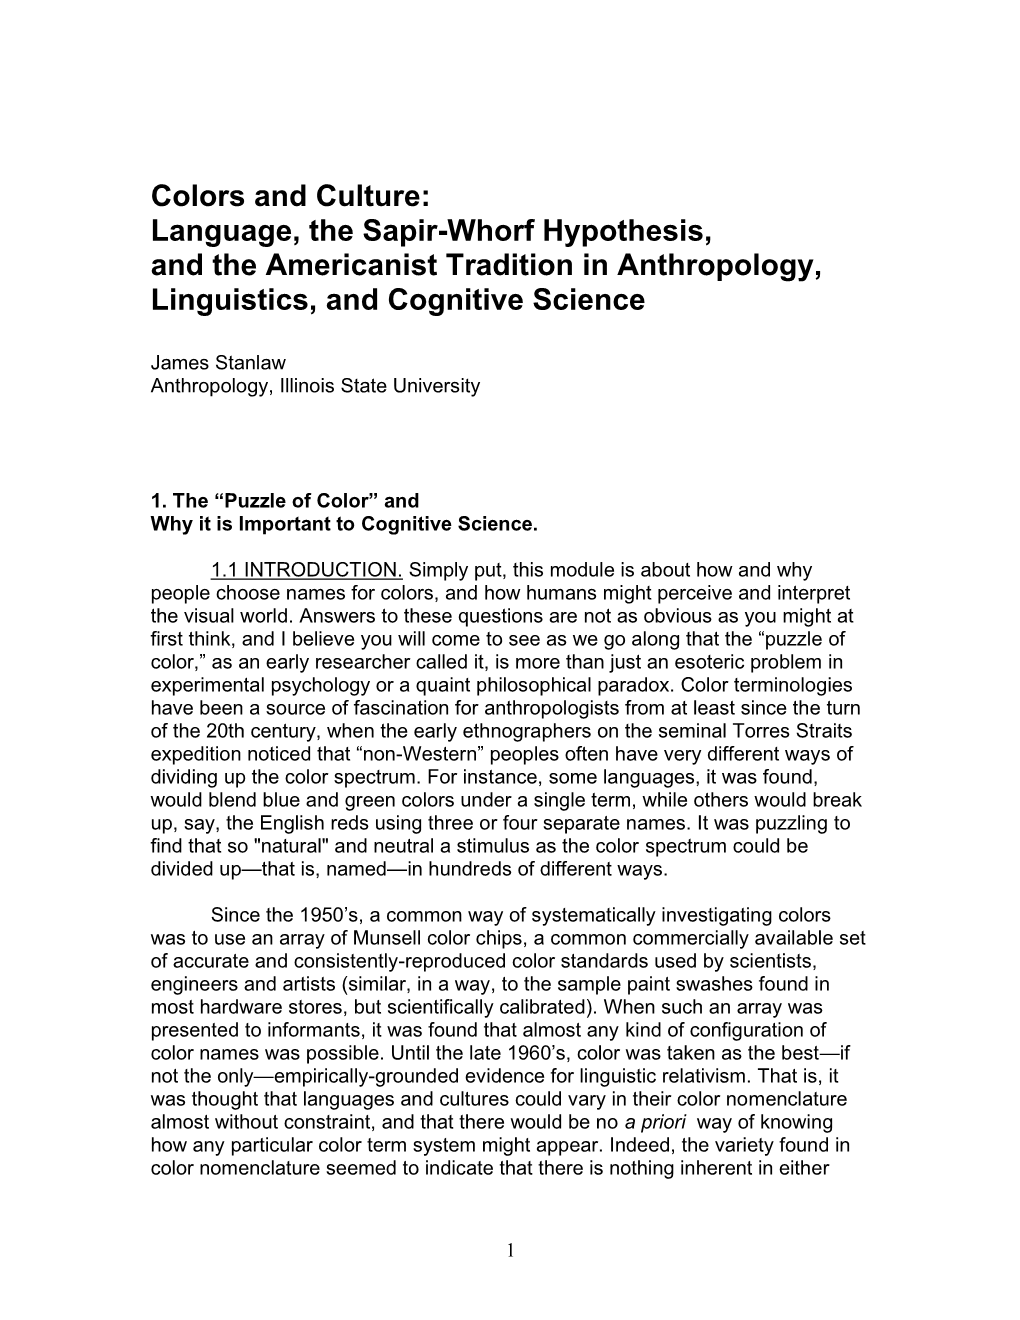 Colors and Culture: Language, the Sapir-Whorf Hypothesis, and the Americanist Tradition in Anthropology, Linguistics, and Cognitive Science